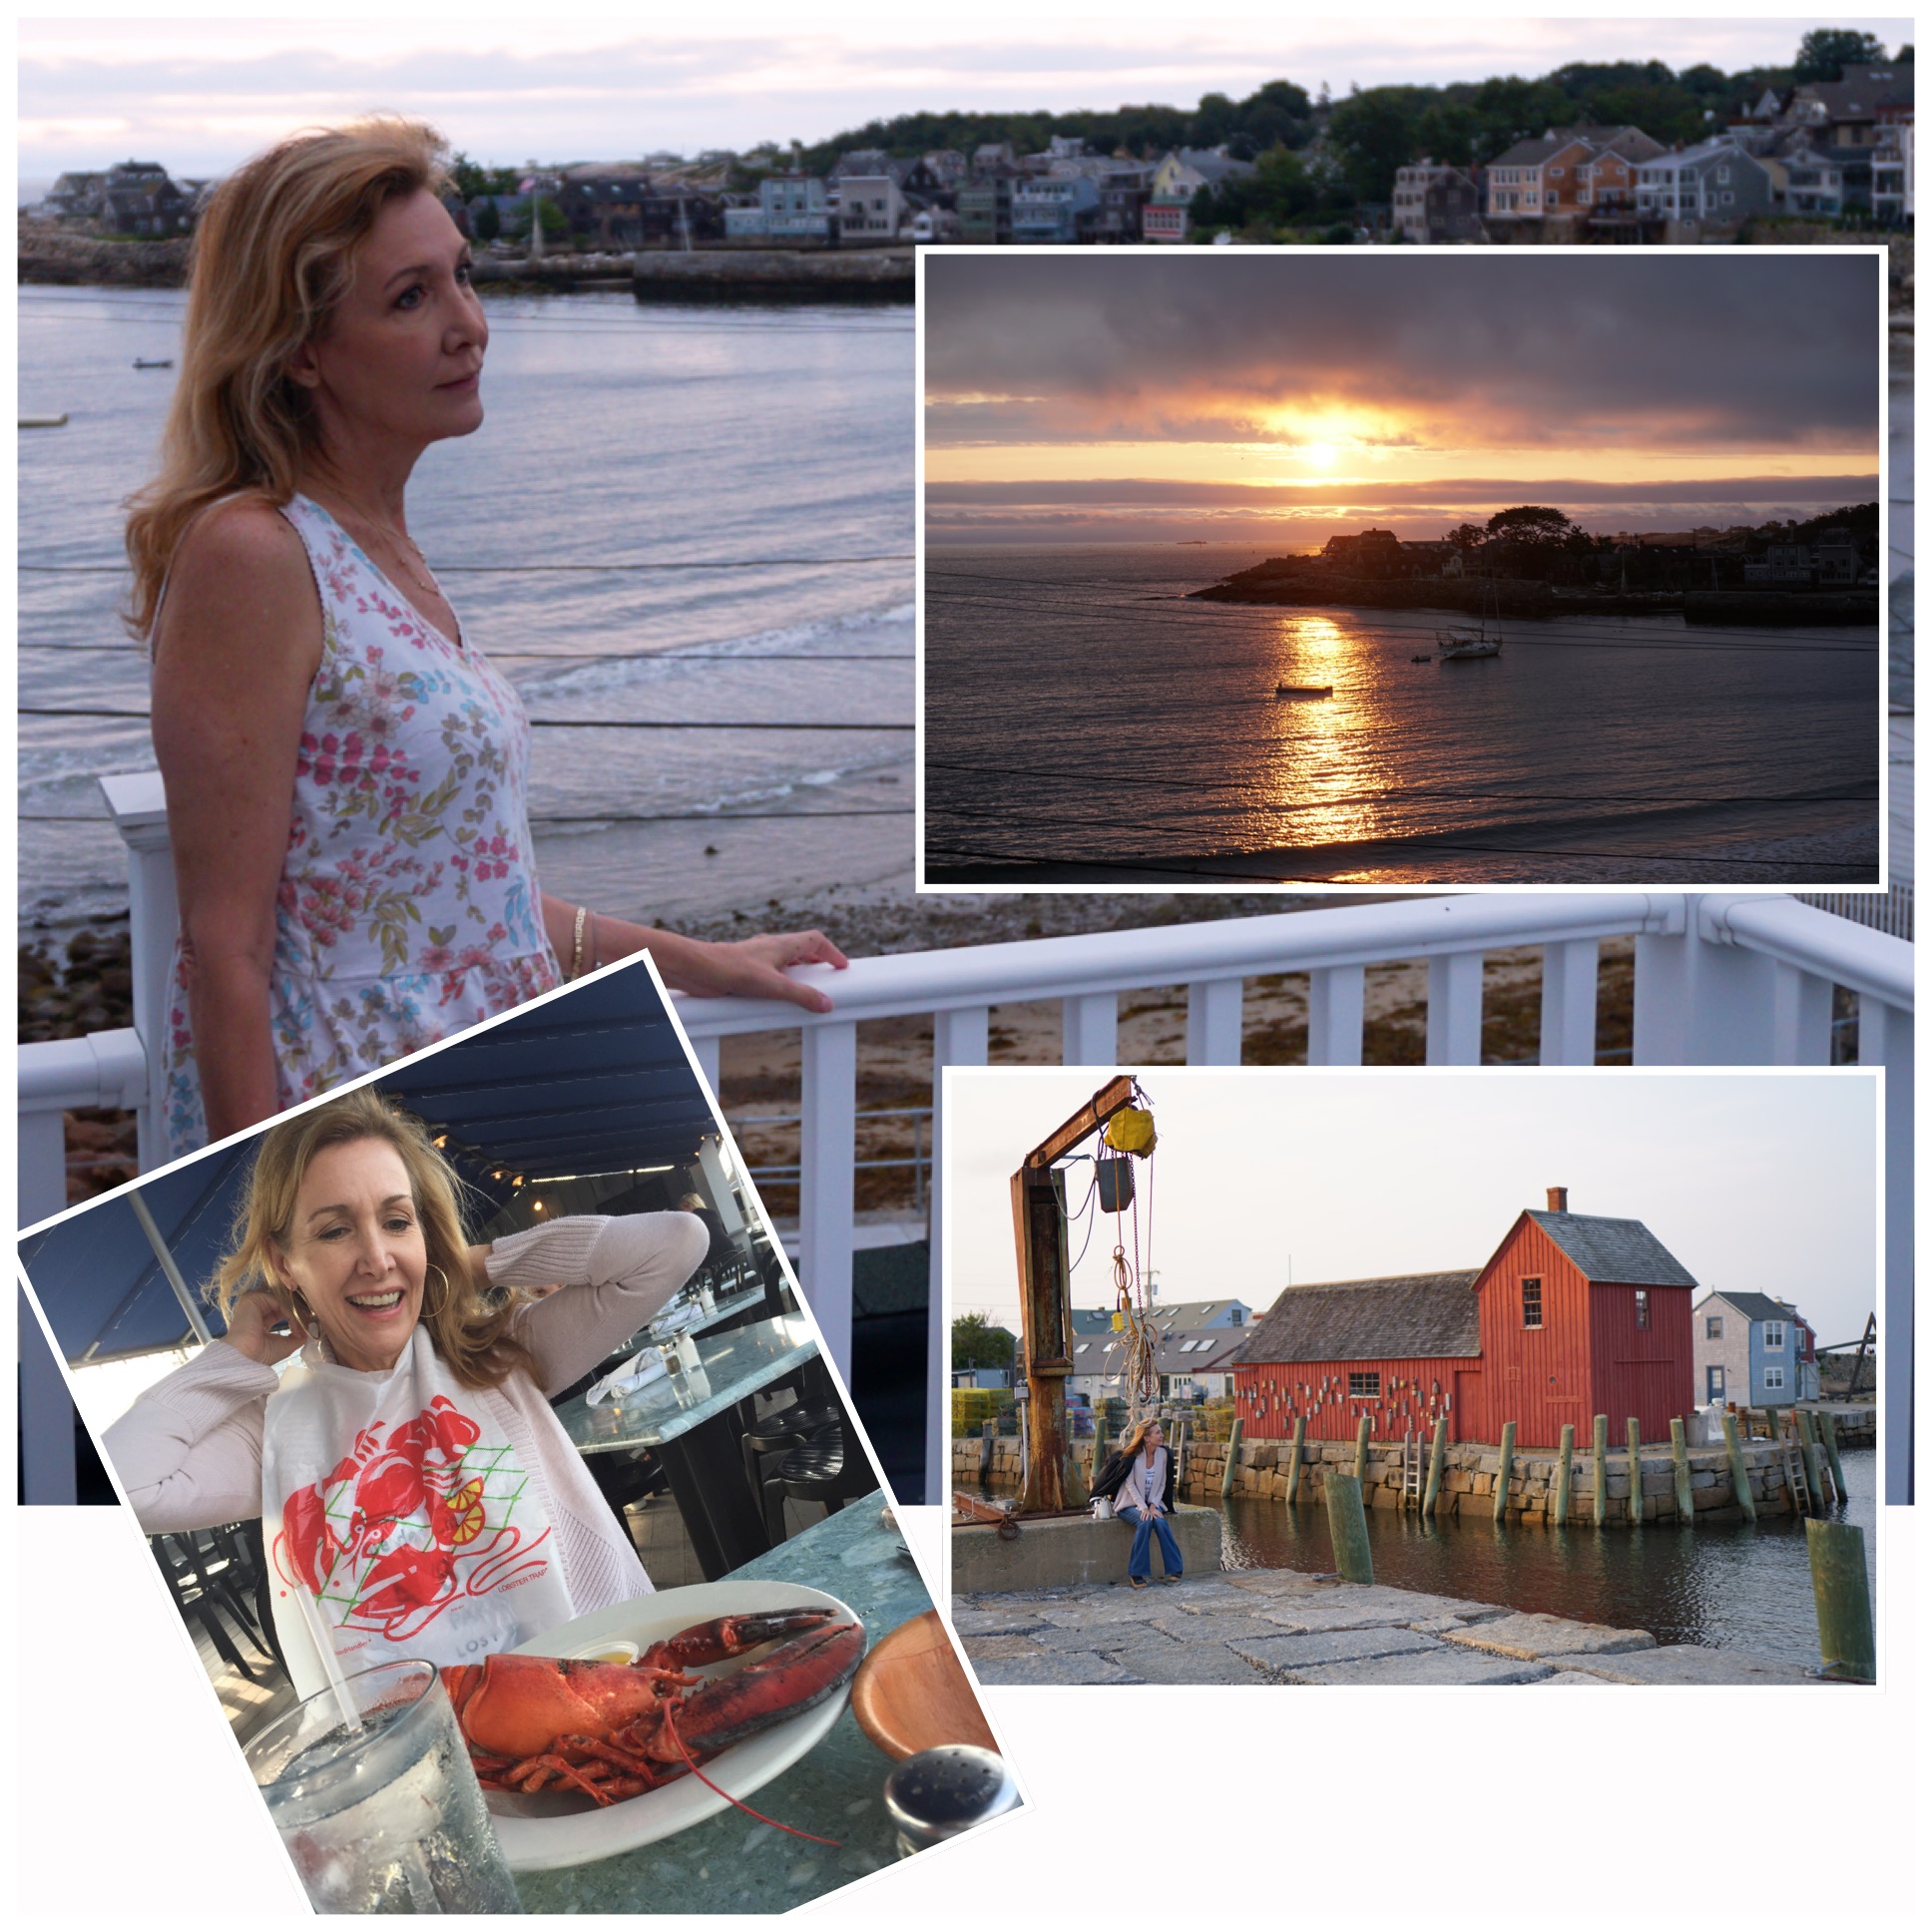 celebrate collage of sharing a journey standing near the ocean, eating lobster and ocean sunset